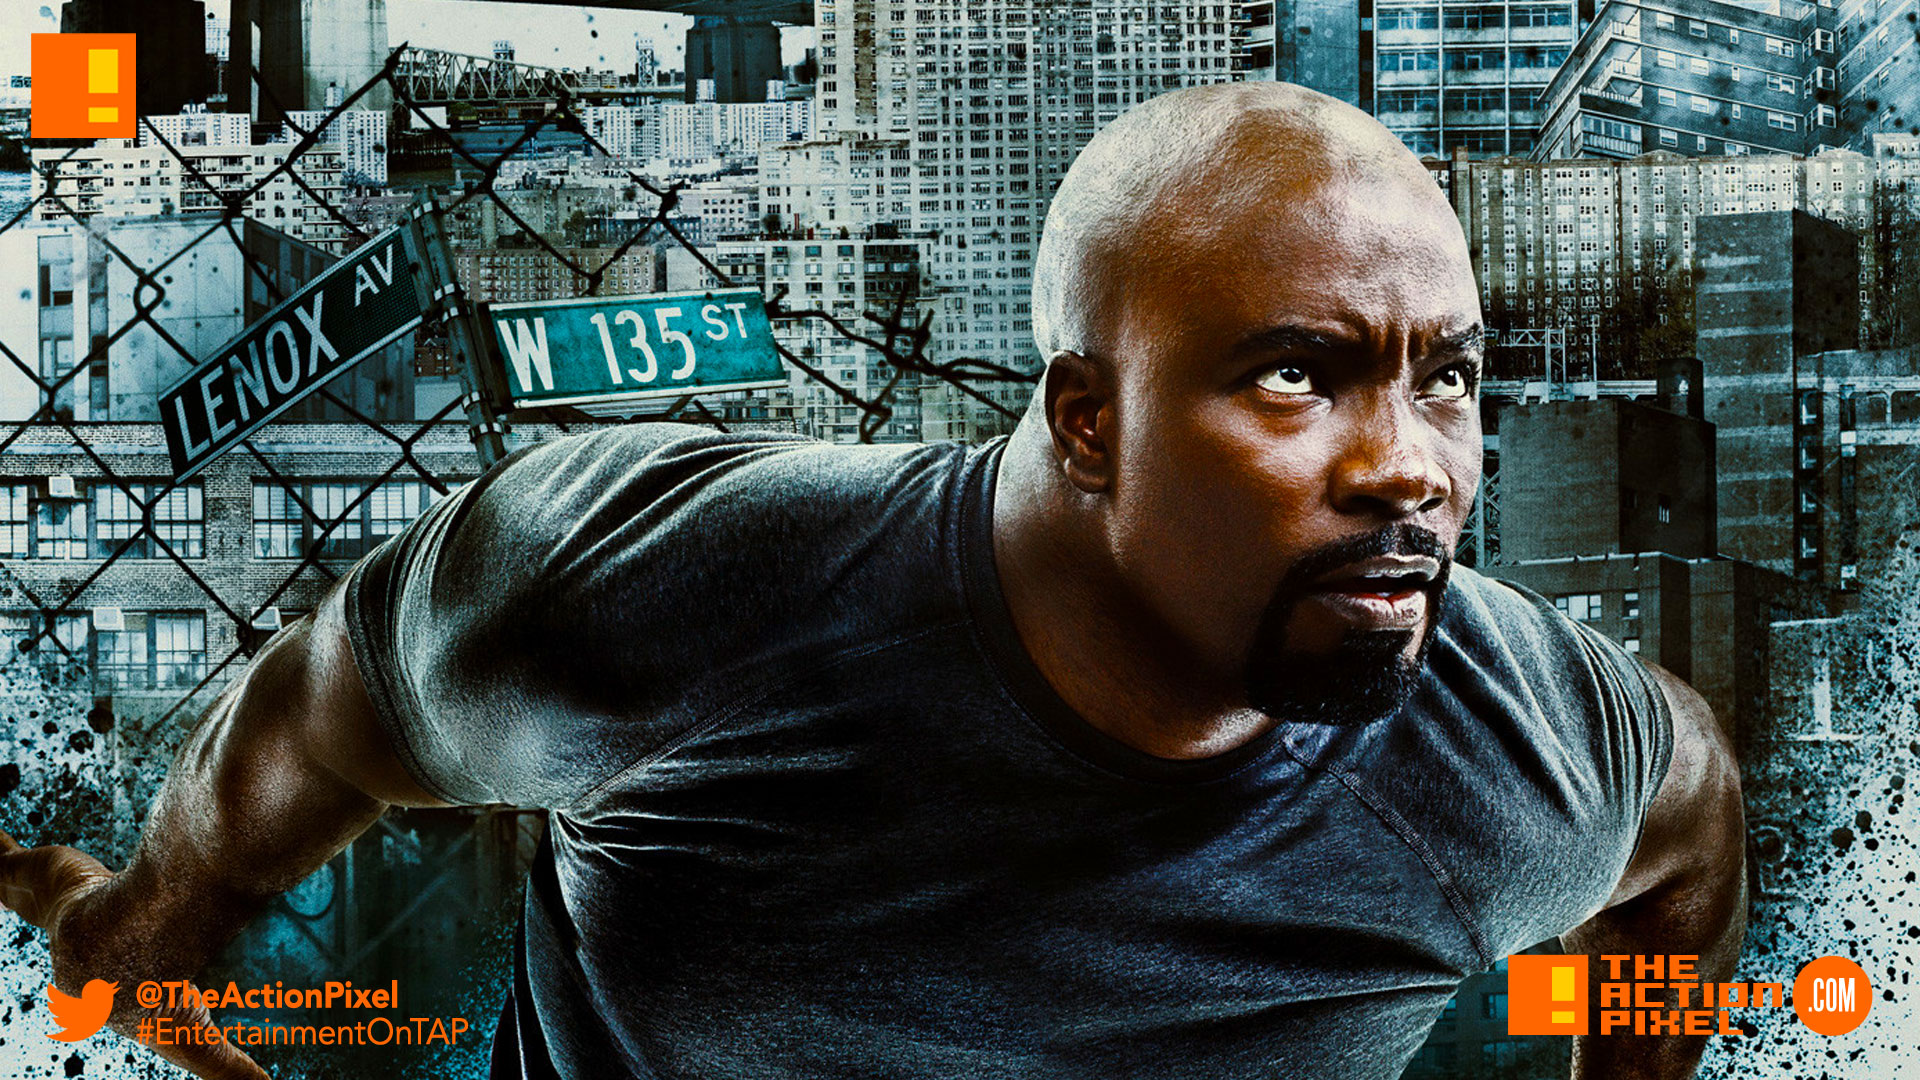 iron fist, luke cage, marvel, marvel entertainment, netflix, the defenders, defend, defenders, mike colter, iron fist, luke cage, luke cage season 2, season 2, photo, still, entertainment on tap, the action pixel,season 2, date announcement, release date,official trailer, black mariah,poster,